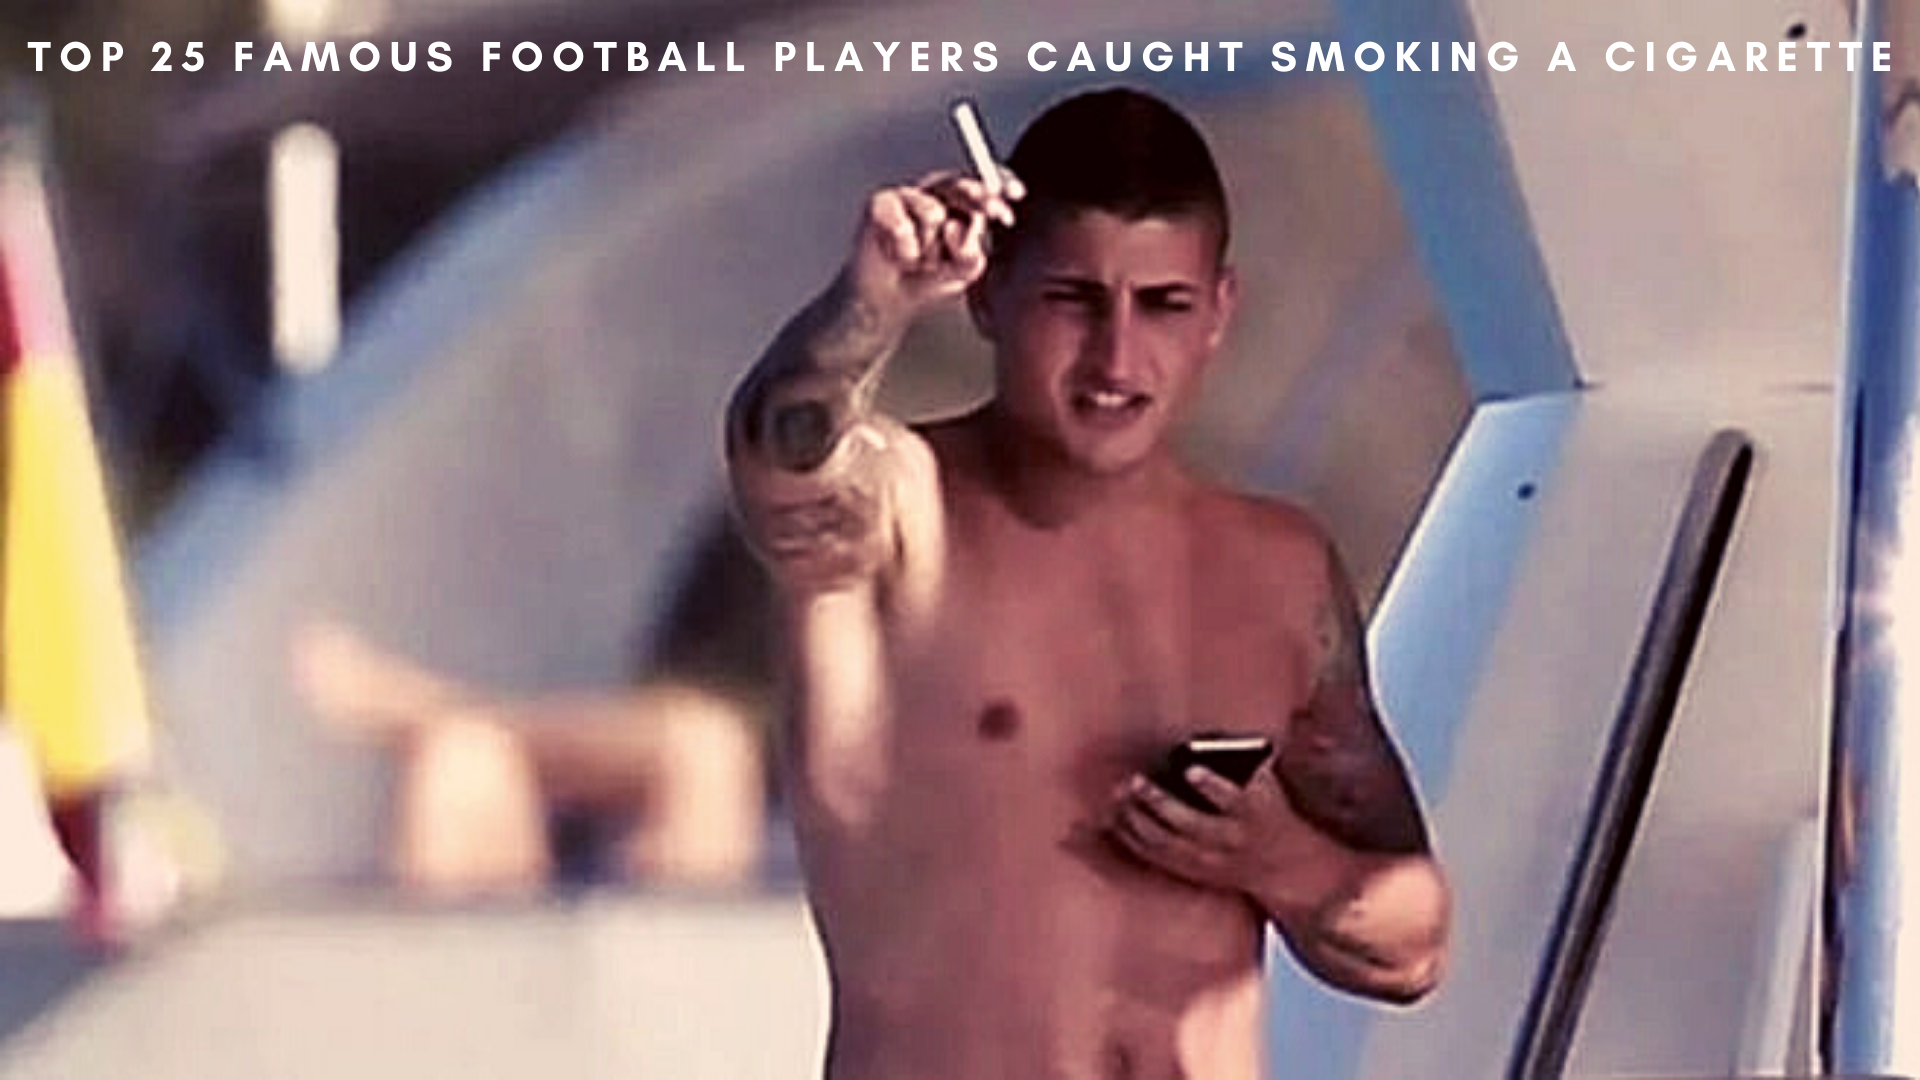 Here is the list of top 25 players caught smoking. (Credit: sports.fr)